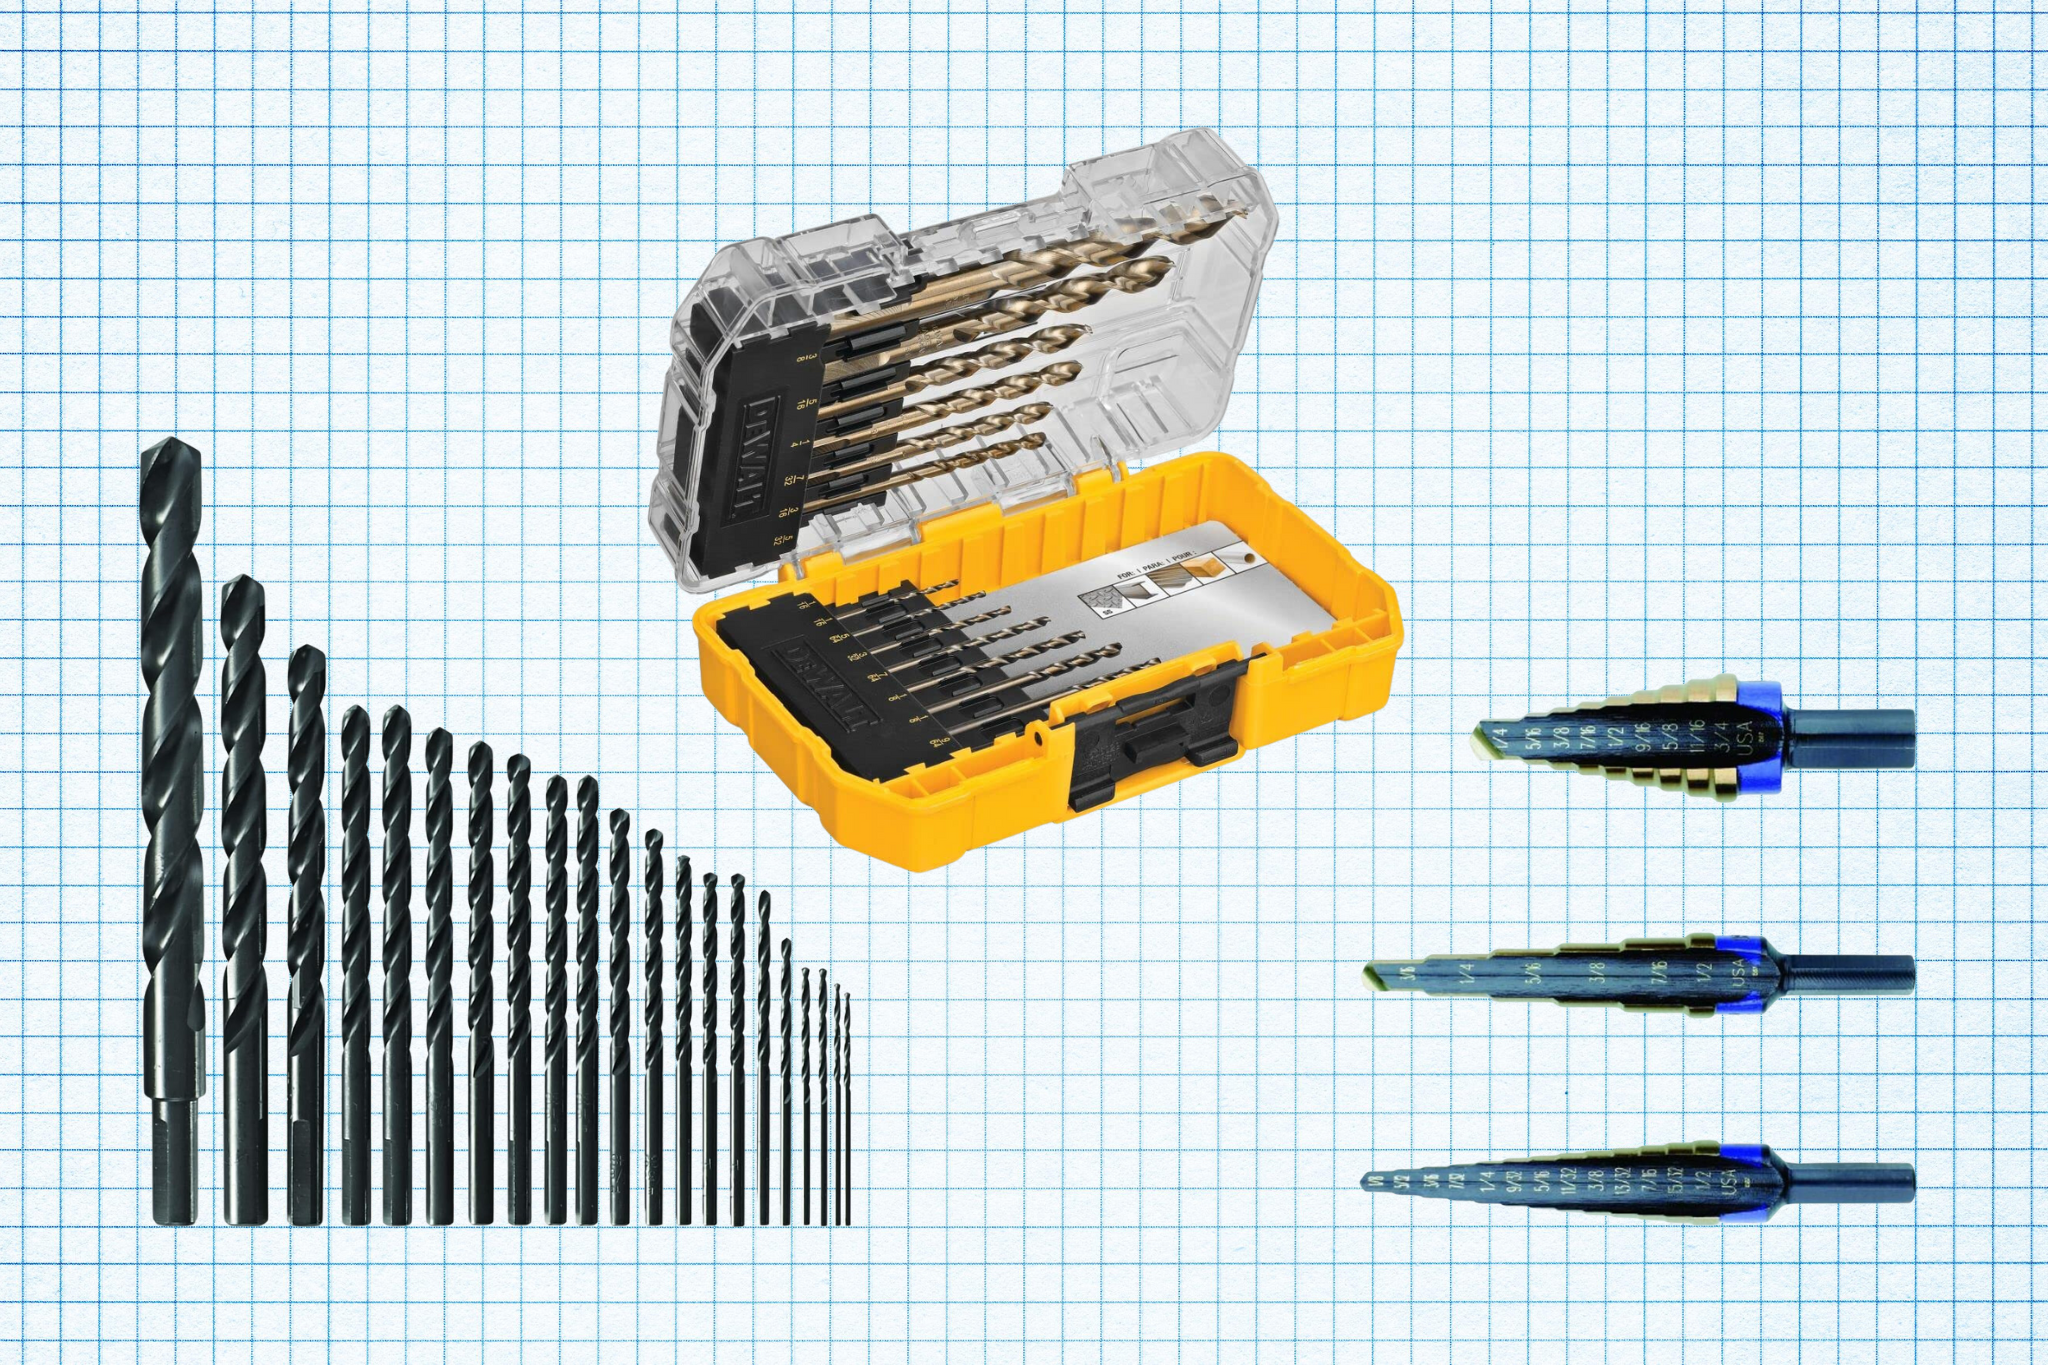 Cobalt Alloy Steel Drill Bit Set, IRWIN Step Drill Bit Set, and BOSCH BL21A Black Oxide Metal Drill Bit Set isolated on a grid paper background